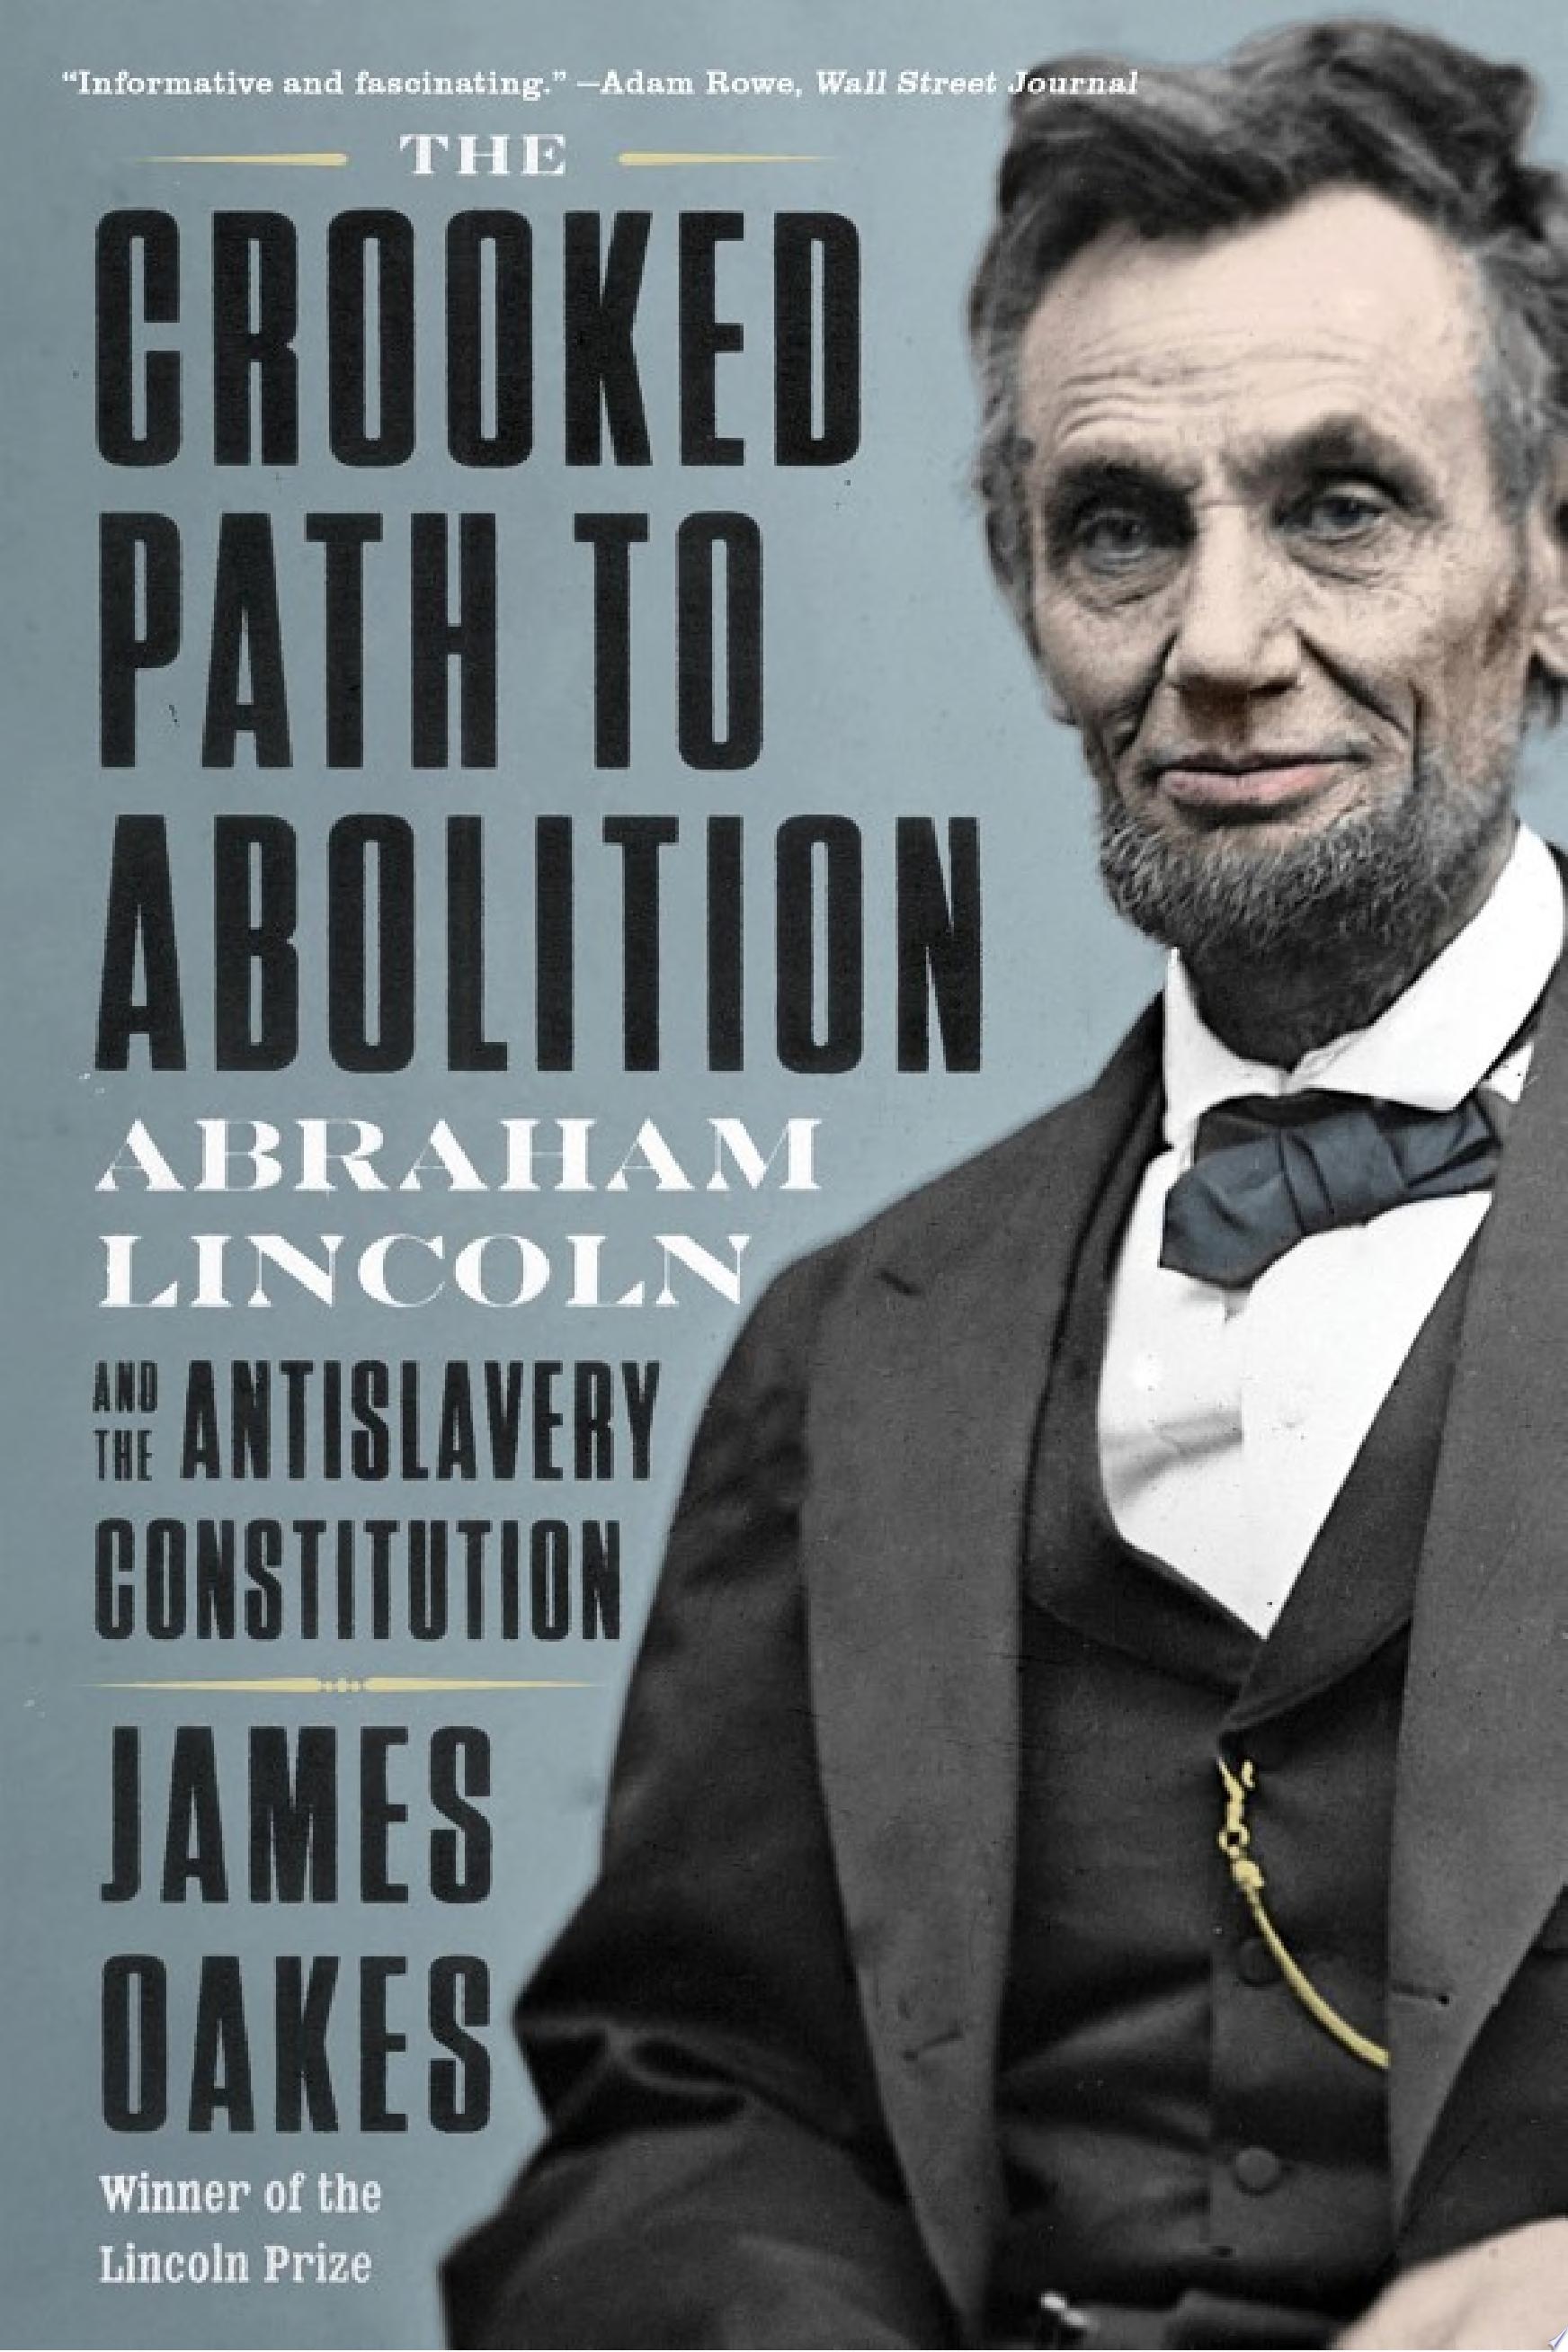 Image for "The Crooked Path to Abolition: Abraham Lincoln and the Antislavery Constitution"